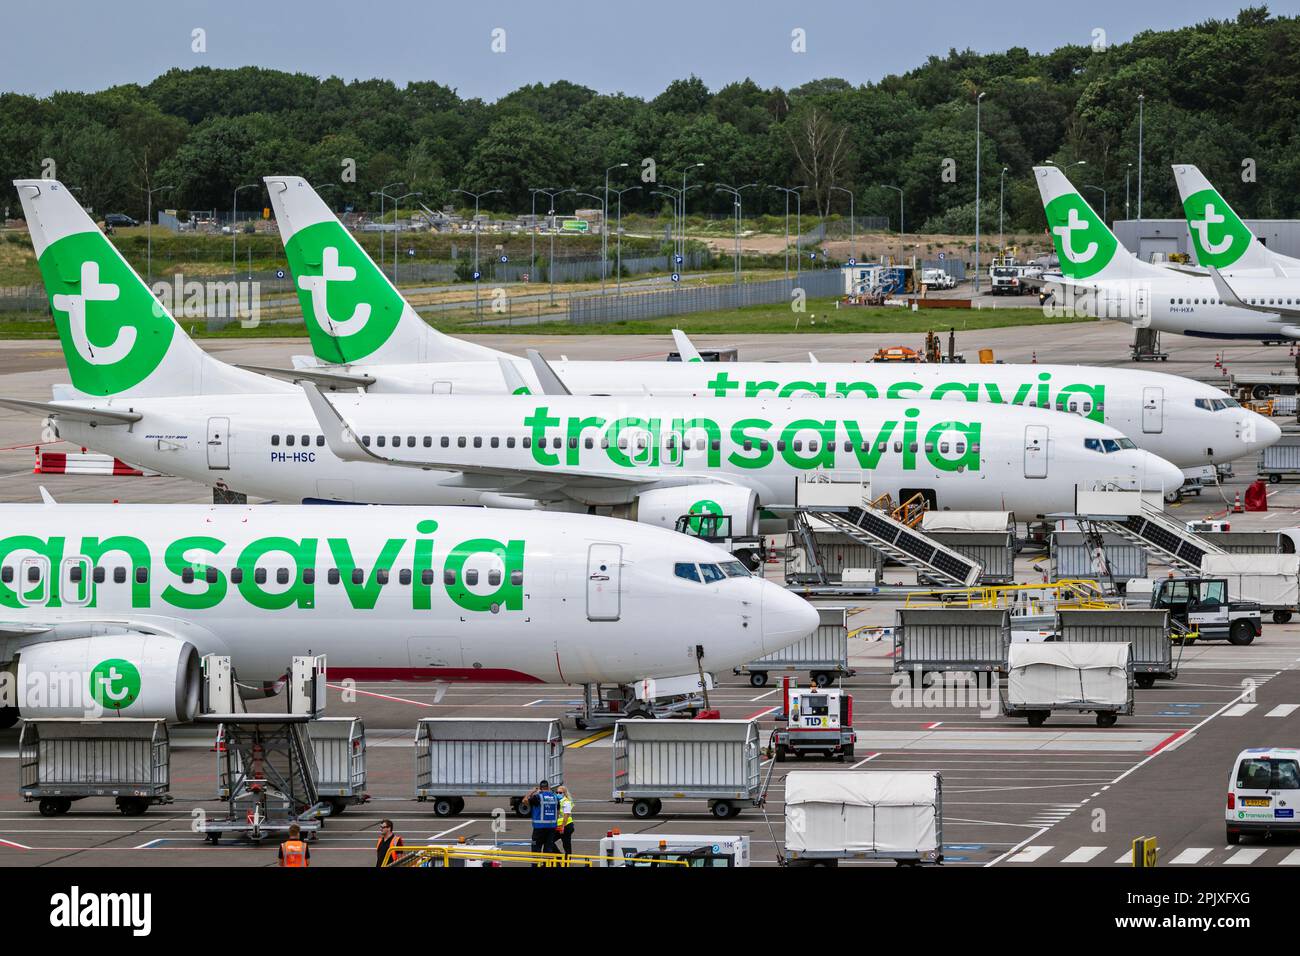 Transavia low-cost airline passenger planes on the tarmac of Eindhoven Airport. The Netherlands - June 29, 2020 Stock Photo